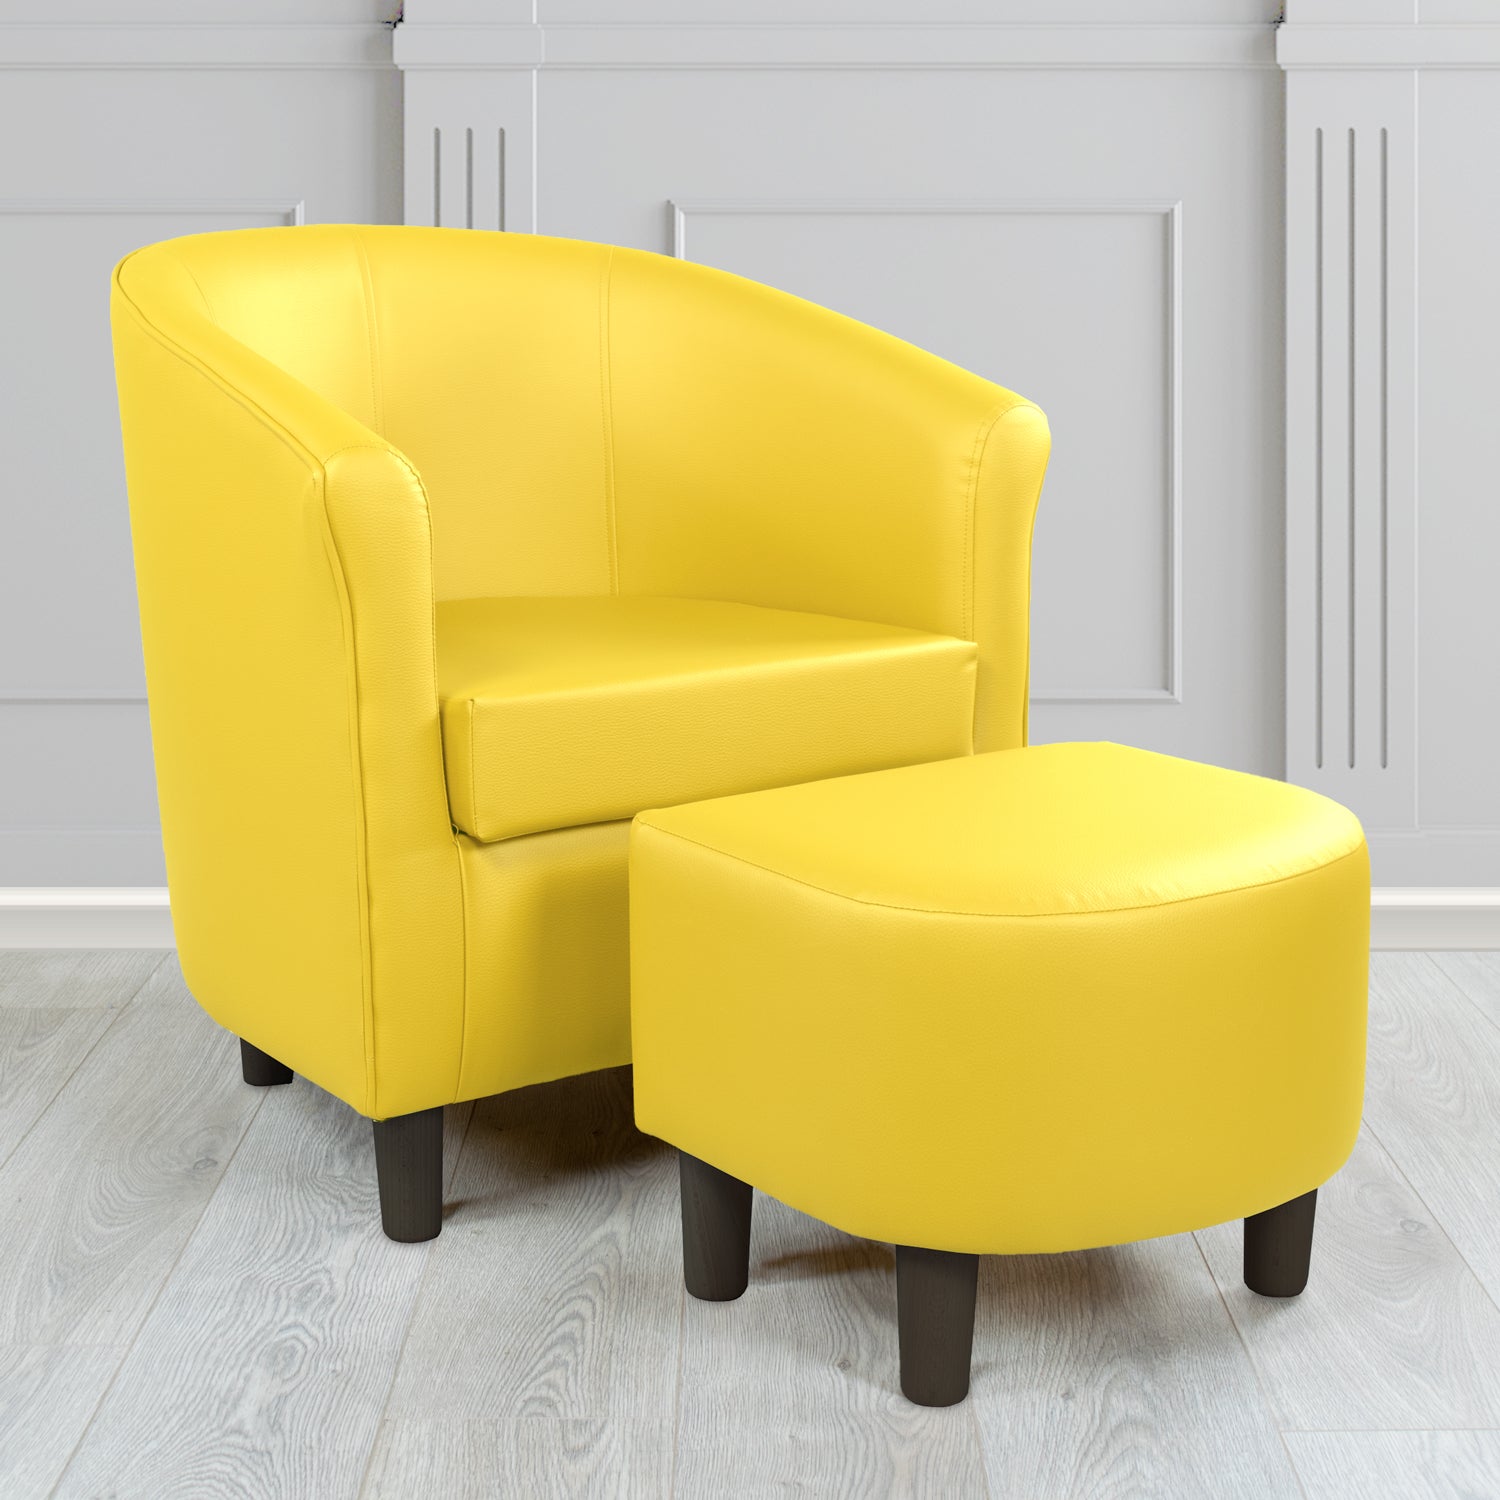 Tuscany Just Colour Marigold Faux Leather Tub Chair with Footstool Set - The Tub Chair Shop